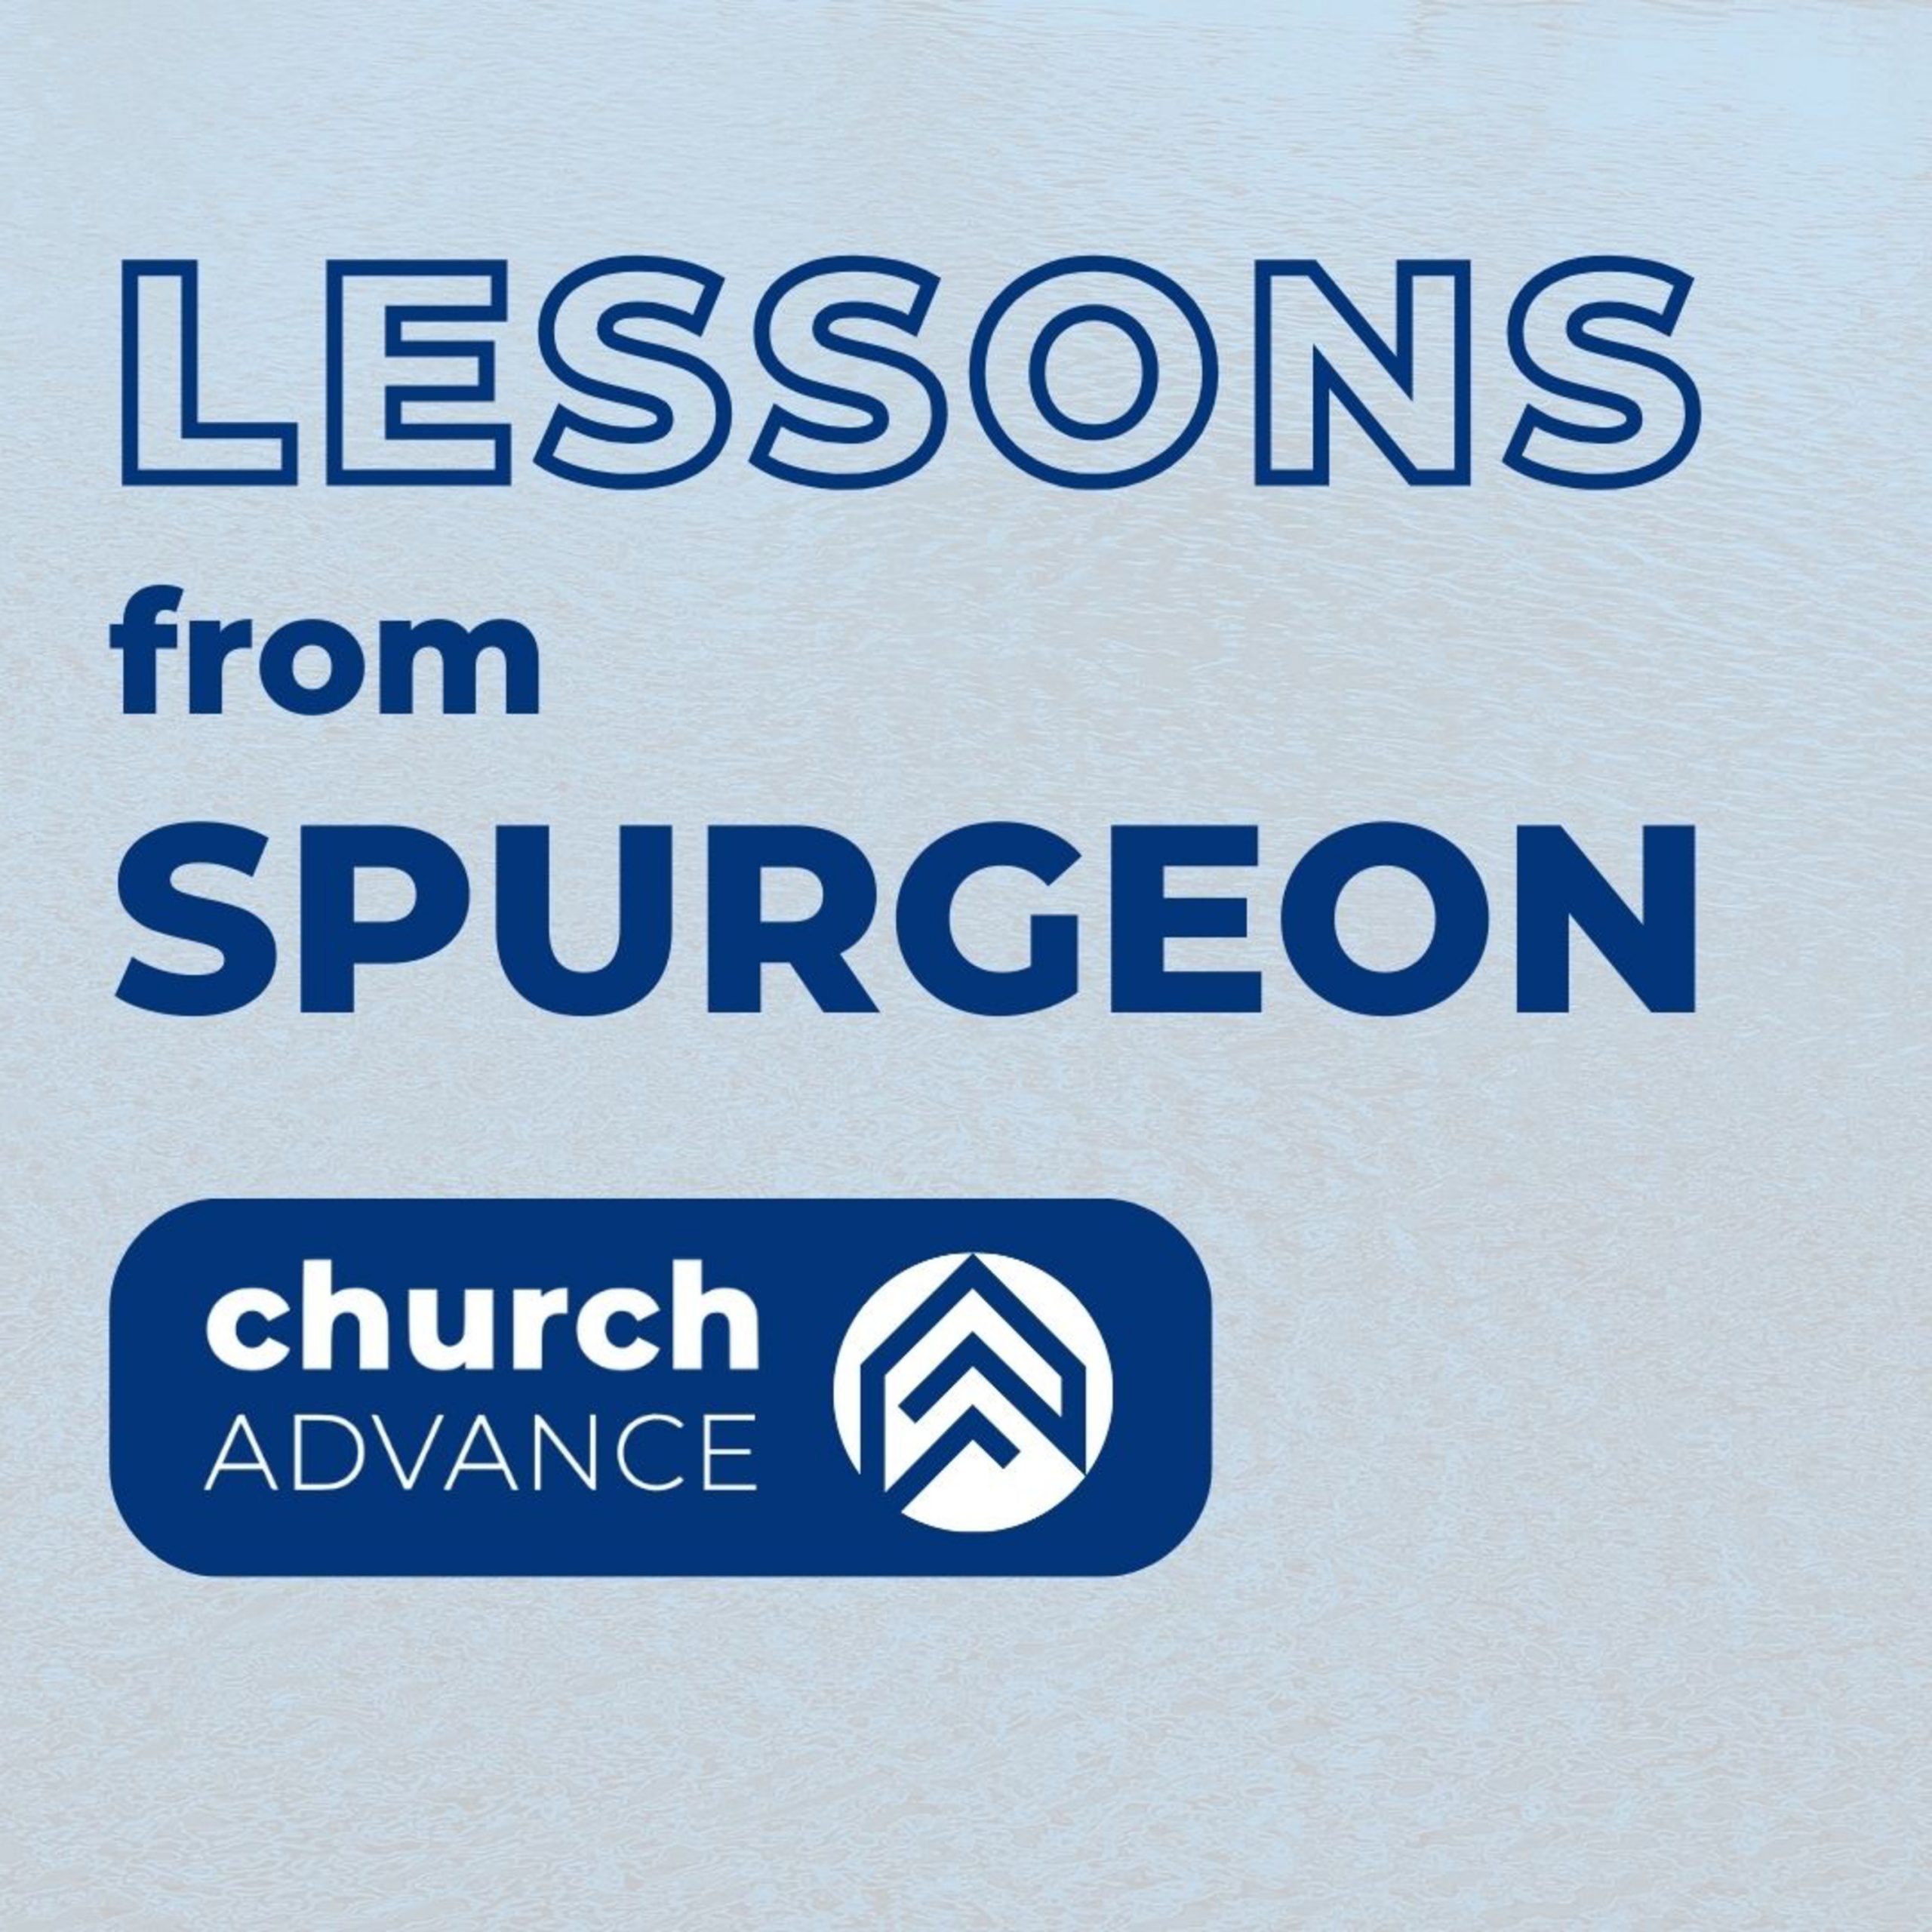 Lessons from Spurgeon